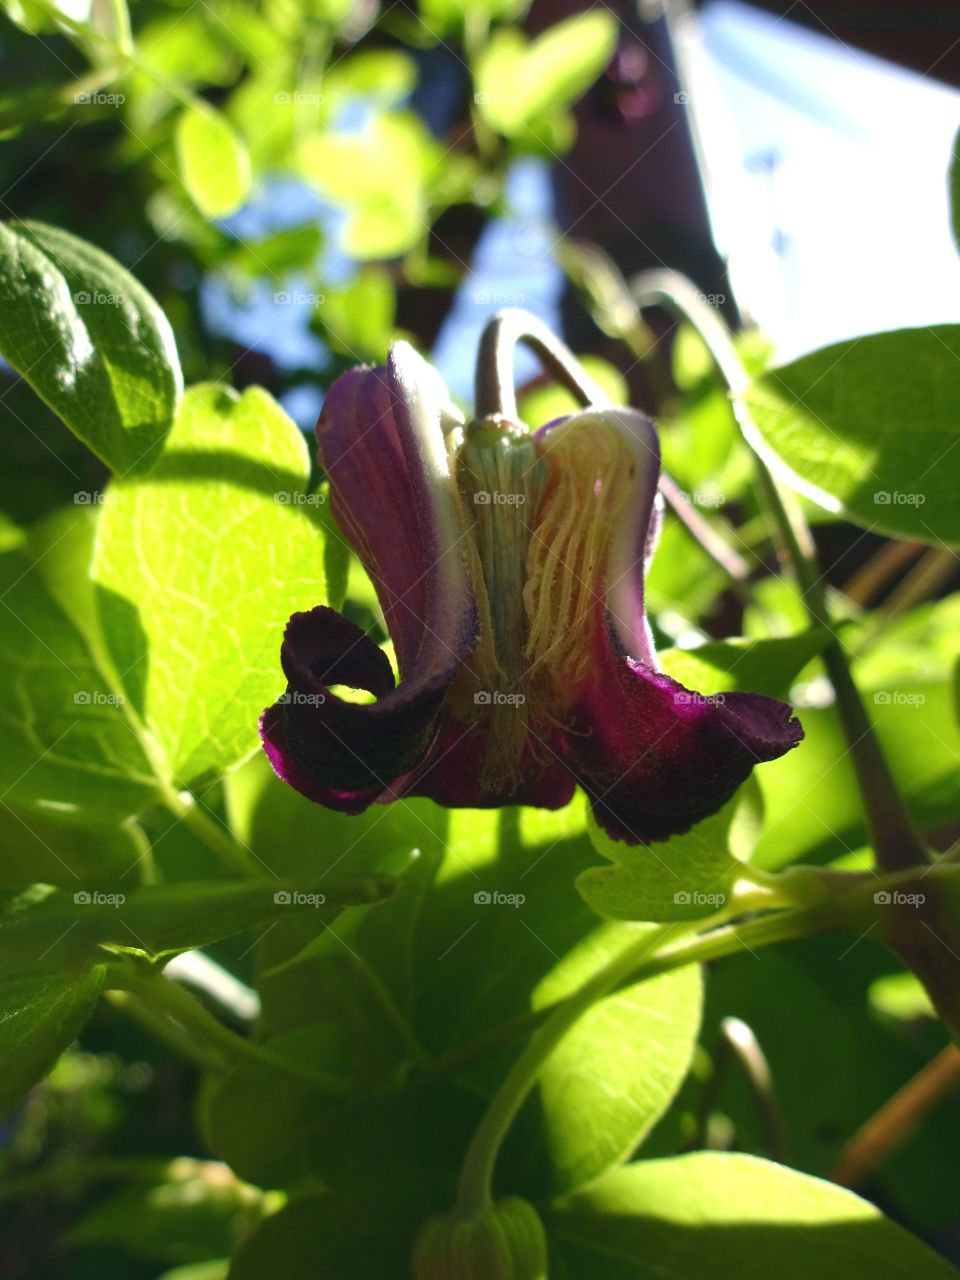 Anatomy of Leather Flower Clematis